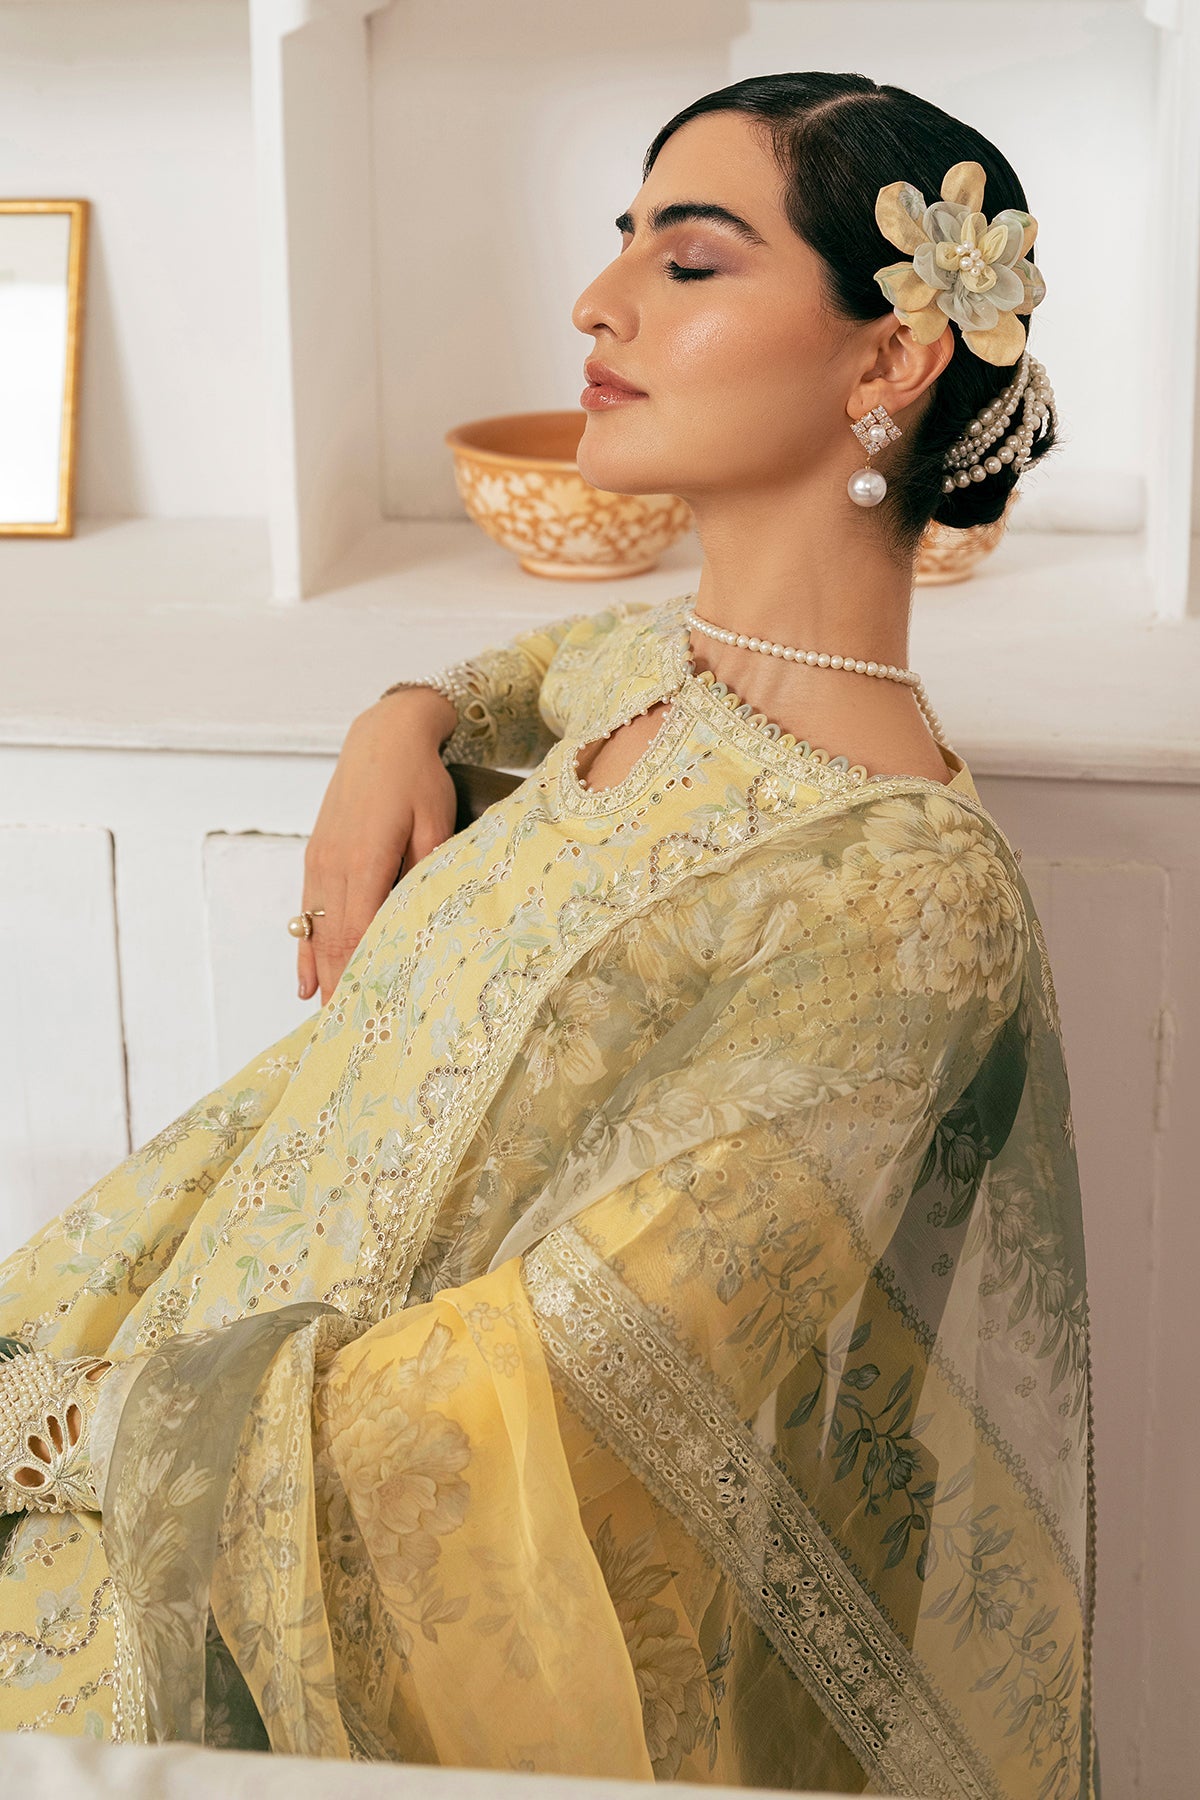 Shop Now, D-04 - Embroidered Swiss Lawn 2023 - Baroque - Shahana Collection UK - Wedding and Bridal Party Dresses